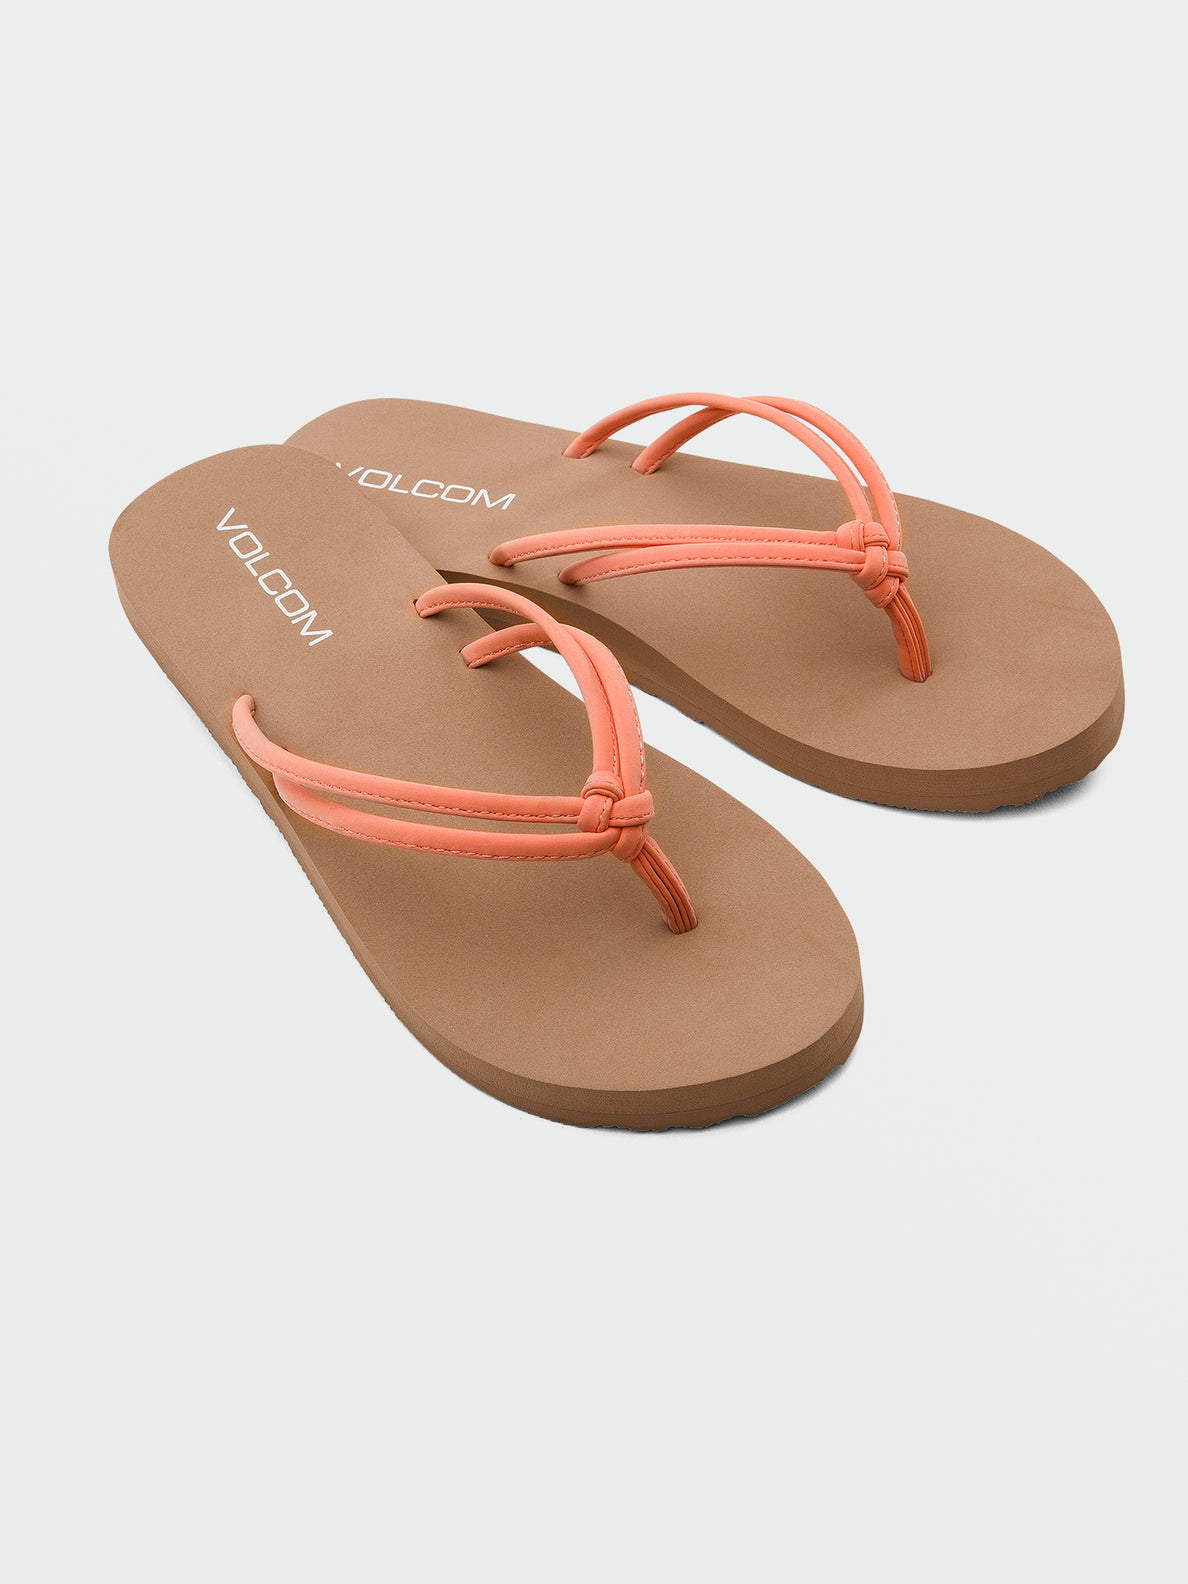 Big Girls Forever And Ever Sandals - Papaya (T0812302_PAY) [F]